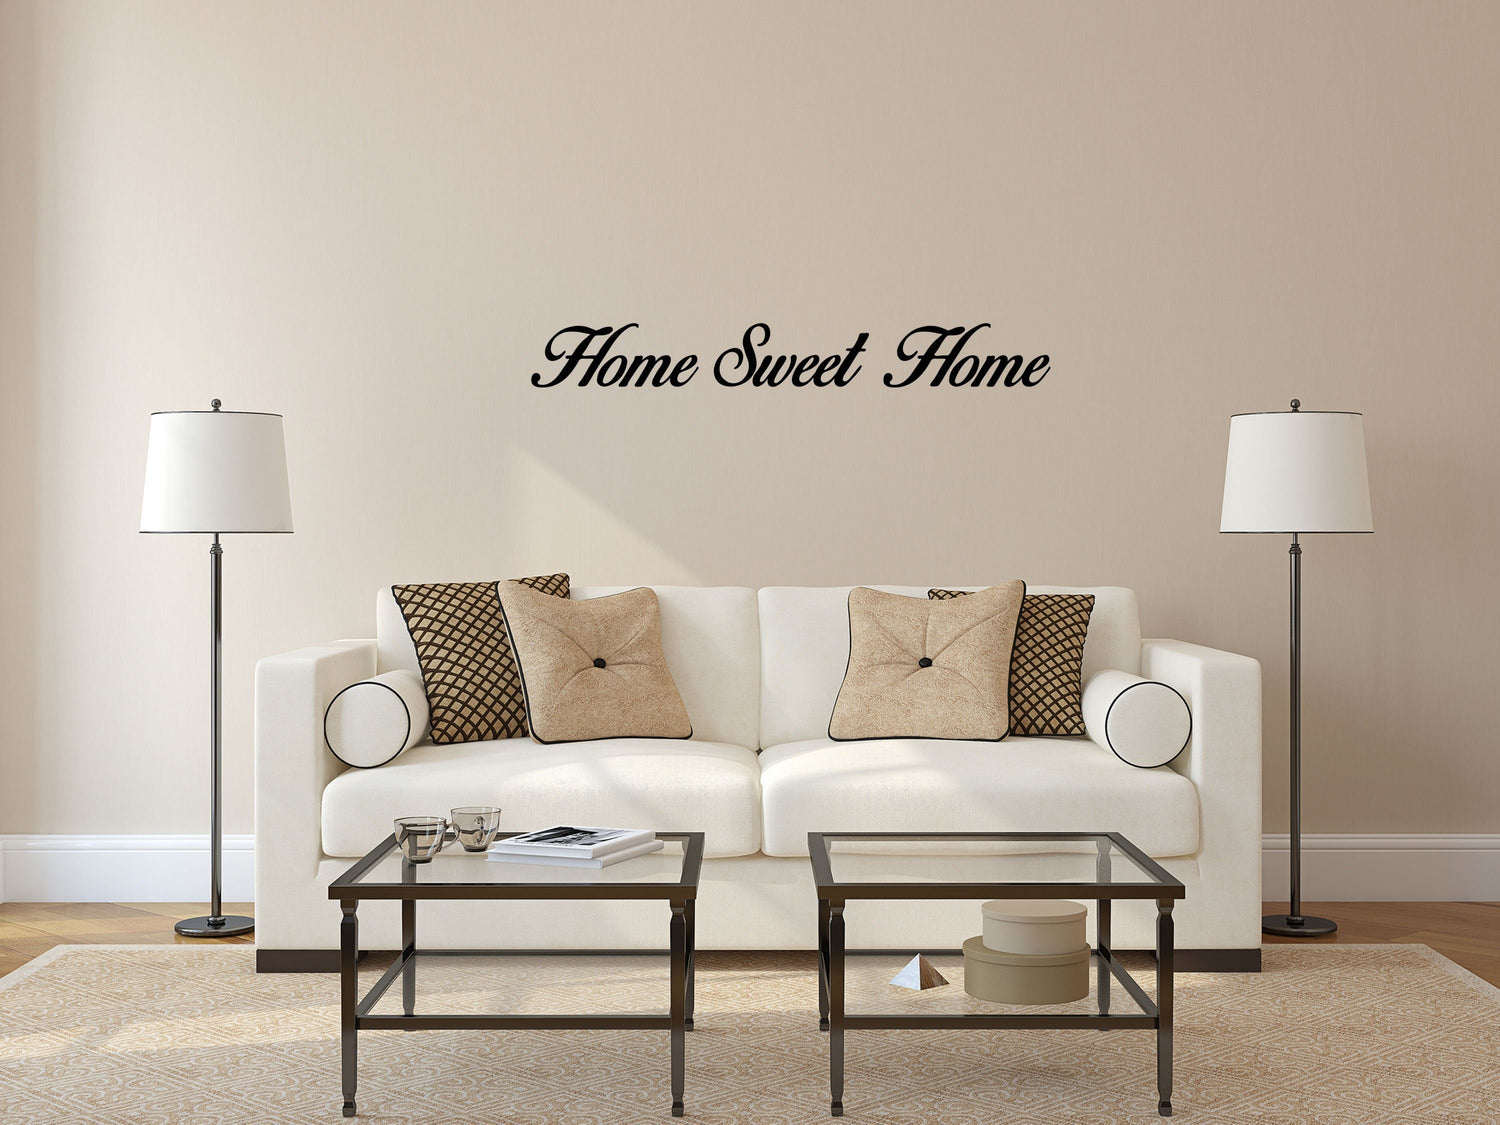 Home Sweet Home - Larger Size Vinyl Wall Decal Inspirational Wall Signs 